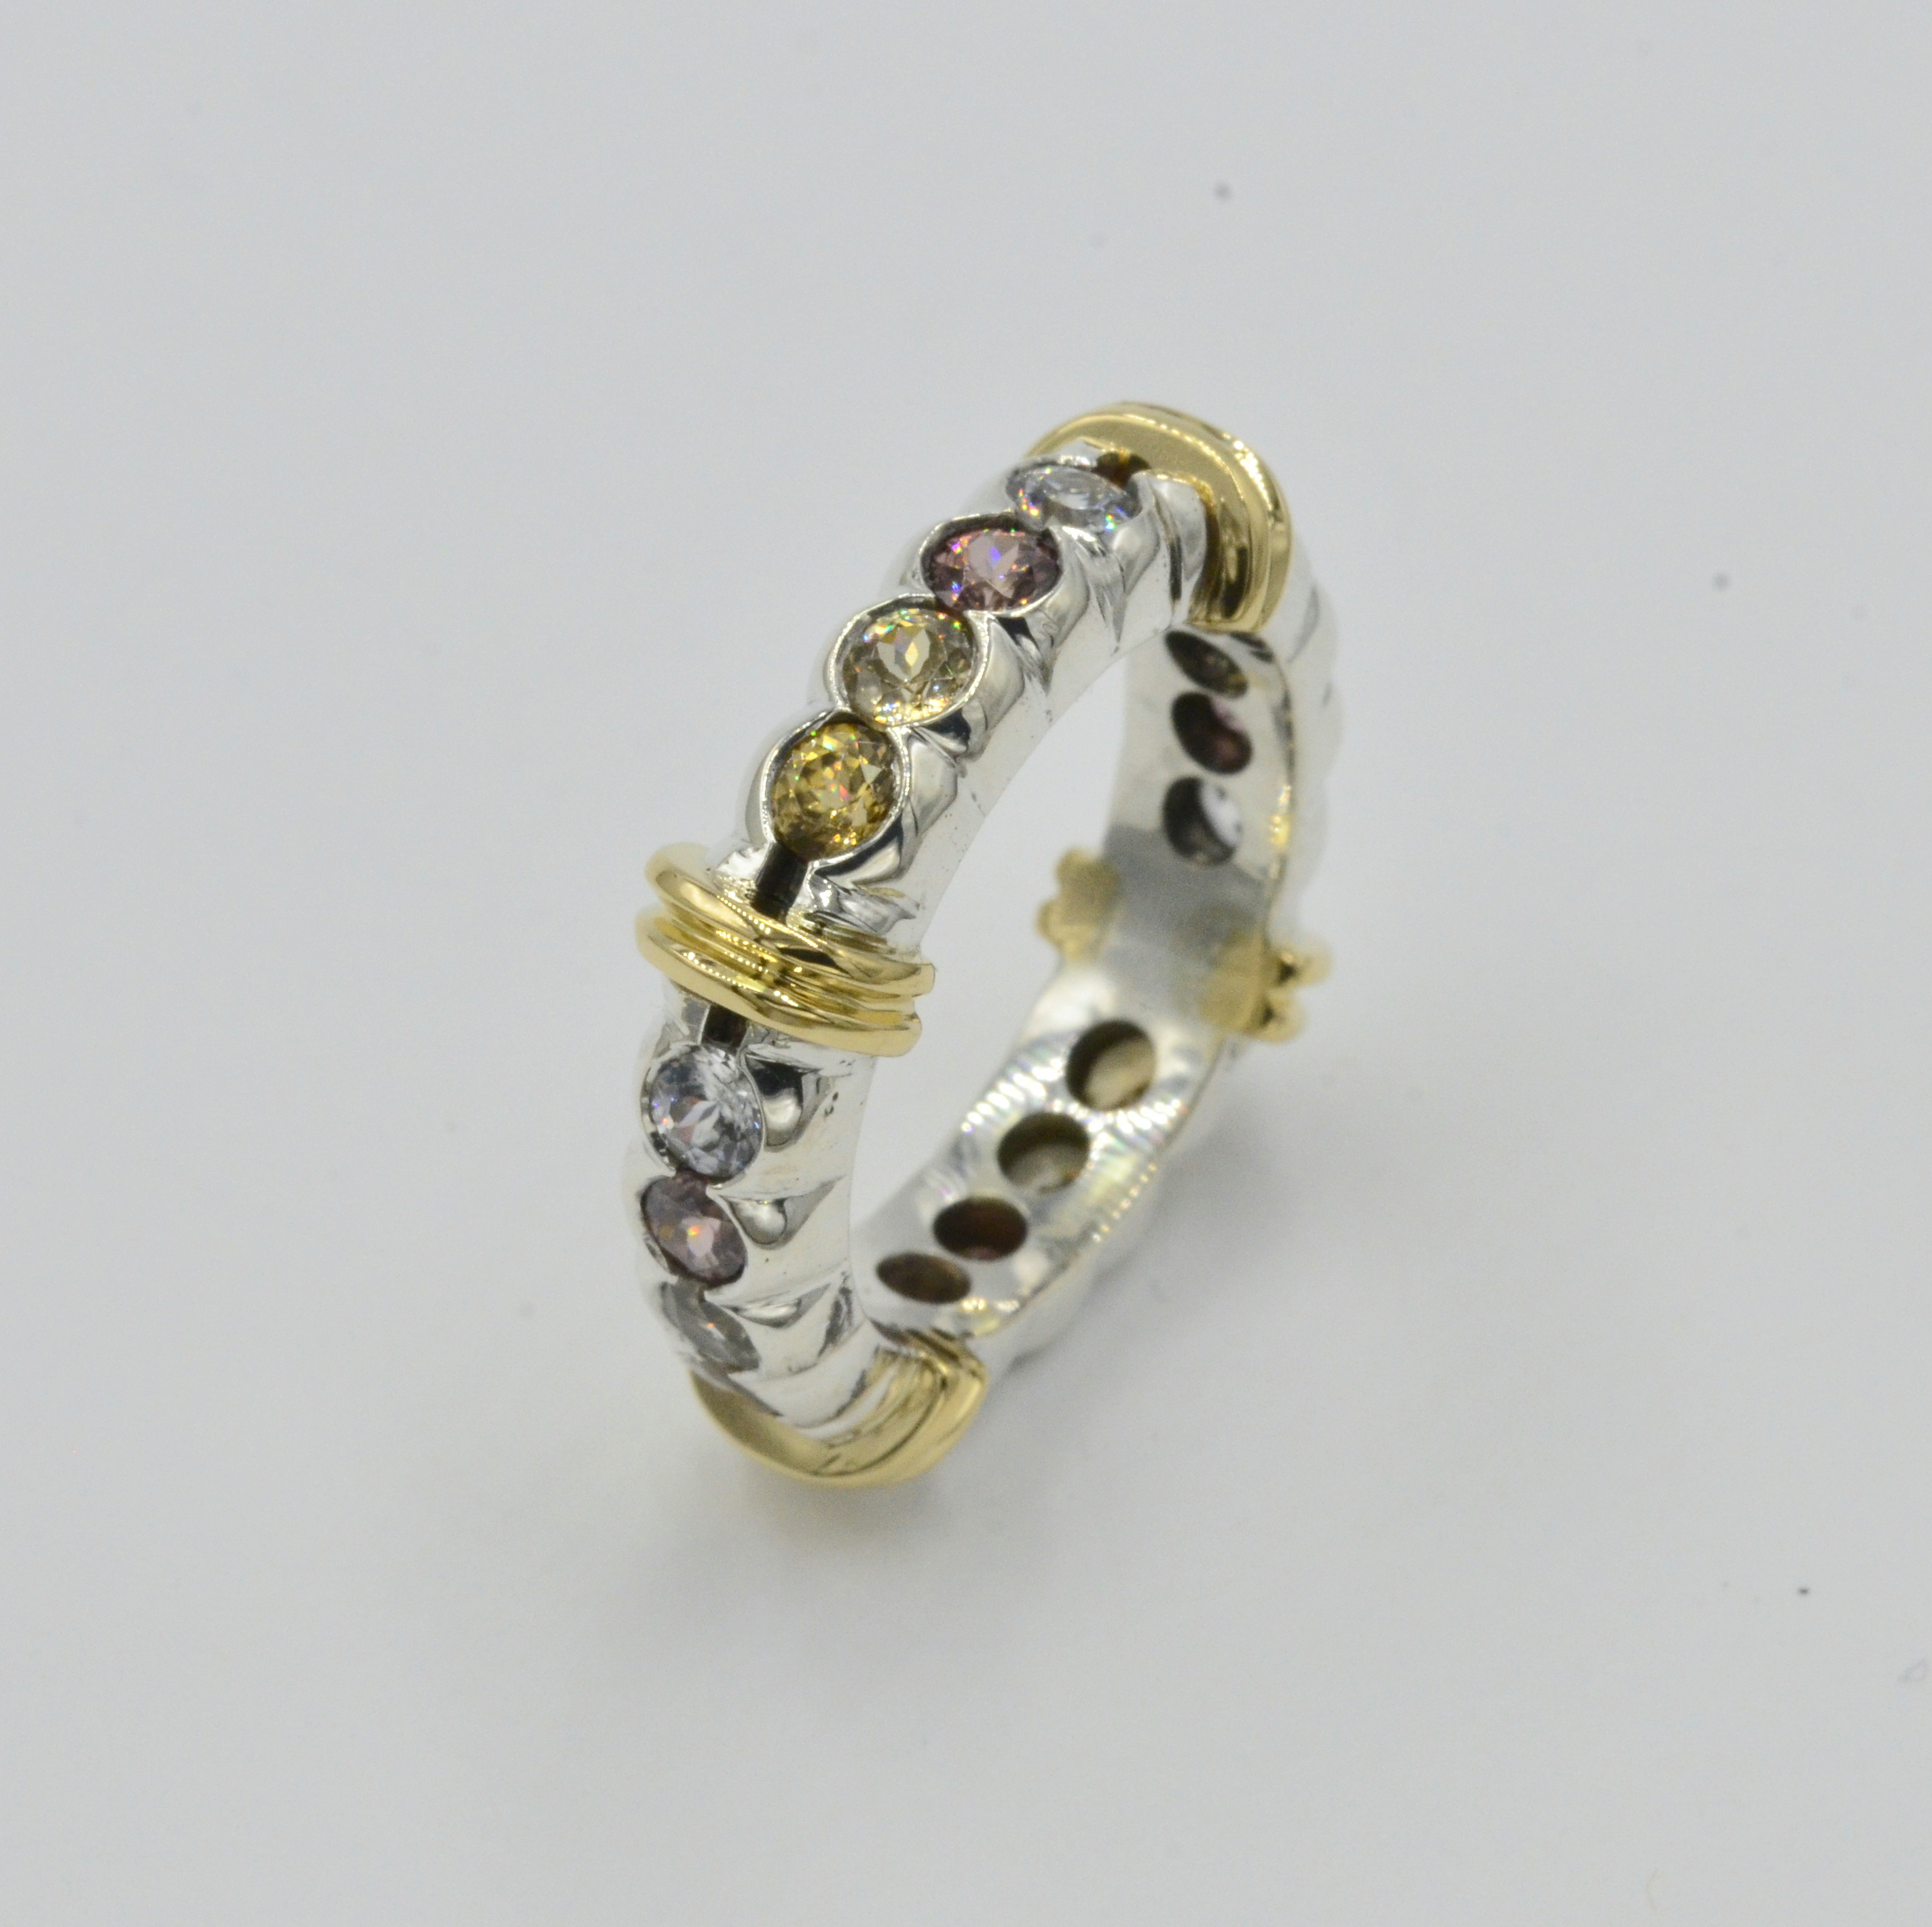 Eternity Style Ring. The Zircons color range from  Champagaine,Light Yellow and Copper.Ring Size is 6.75. Can be remade to accomodate a specific ring size. Please call for estimate
